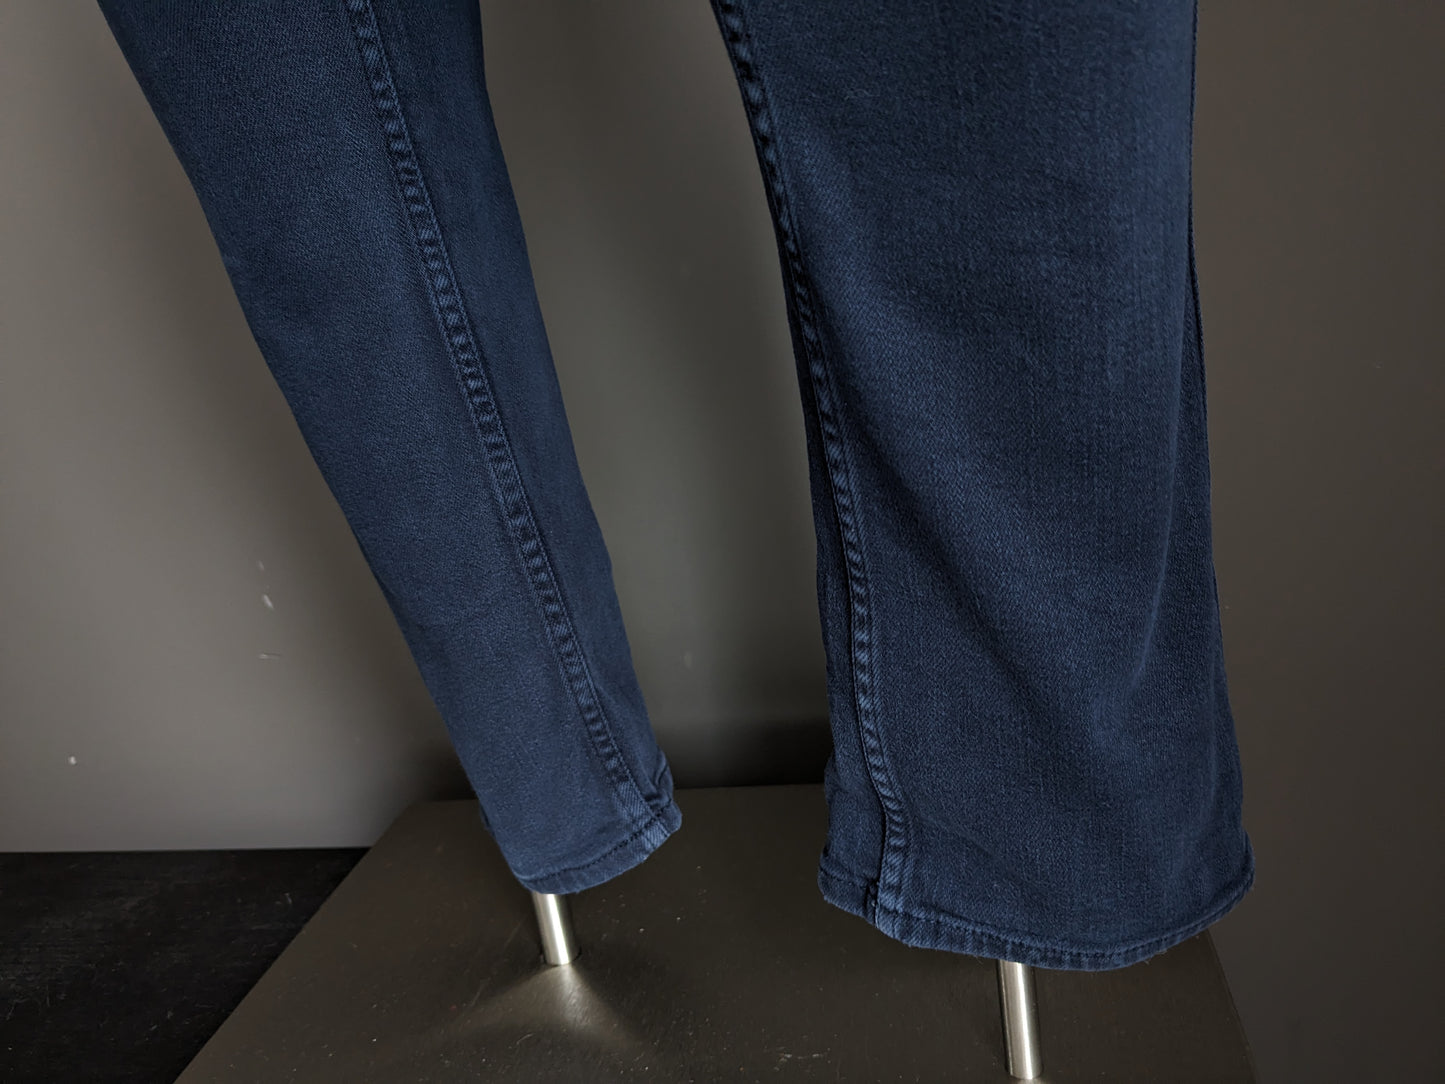 7 For All Mankind Jeans. Dark blue colored. Size W33 - L34. stretch.